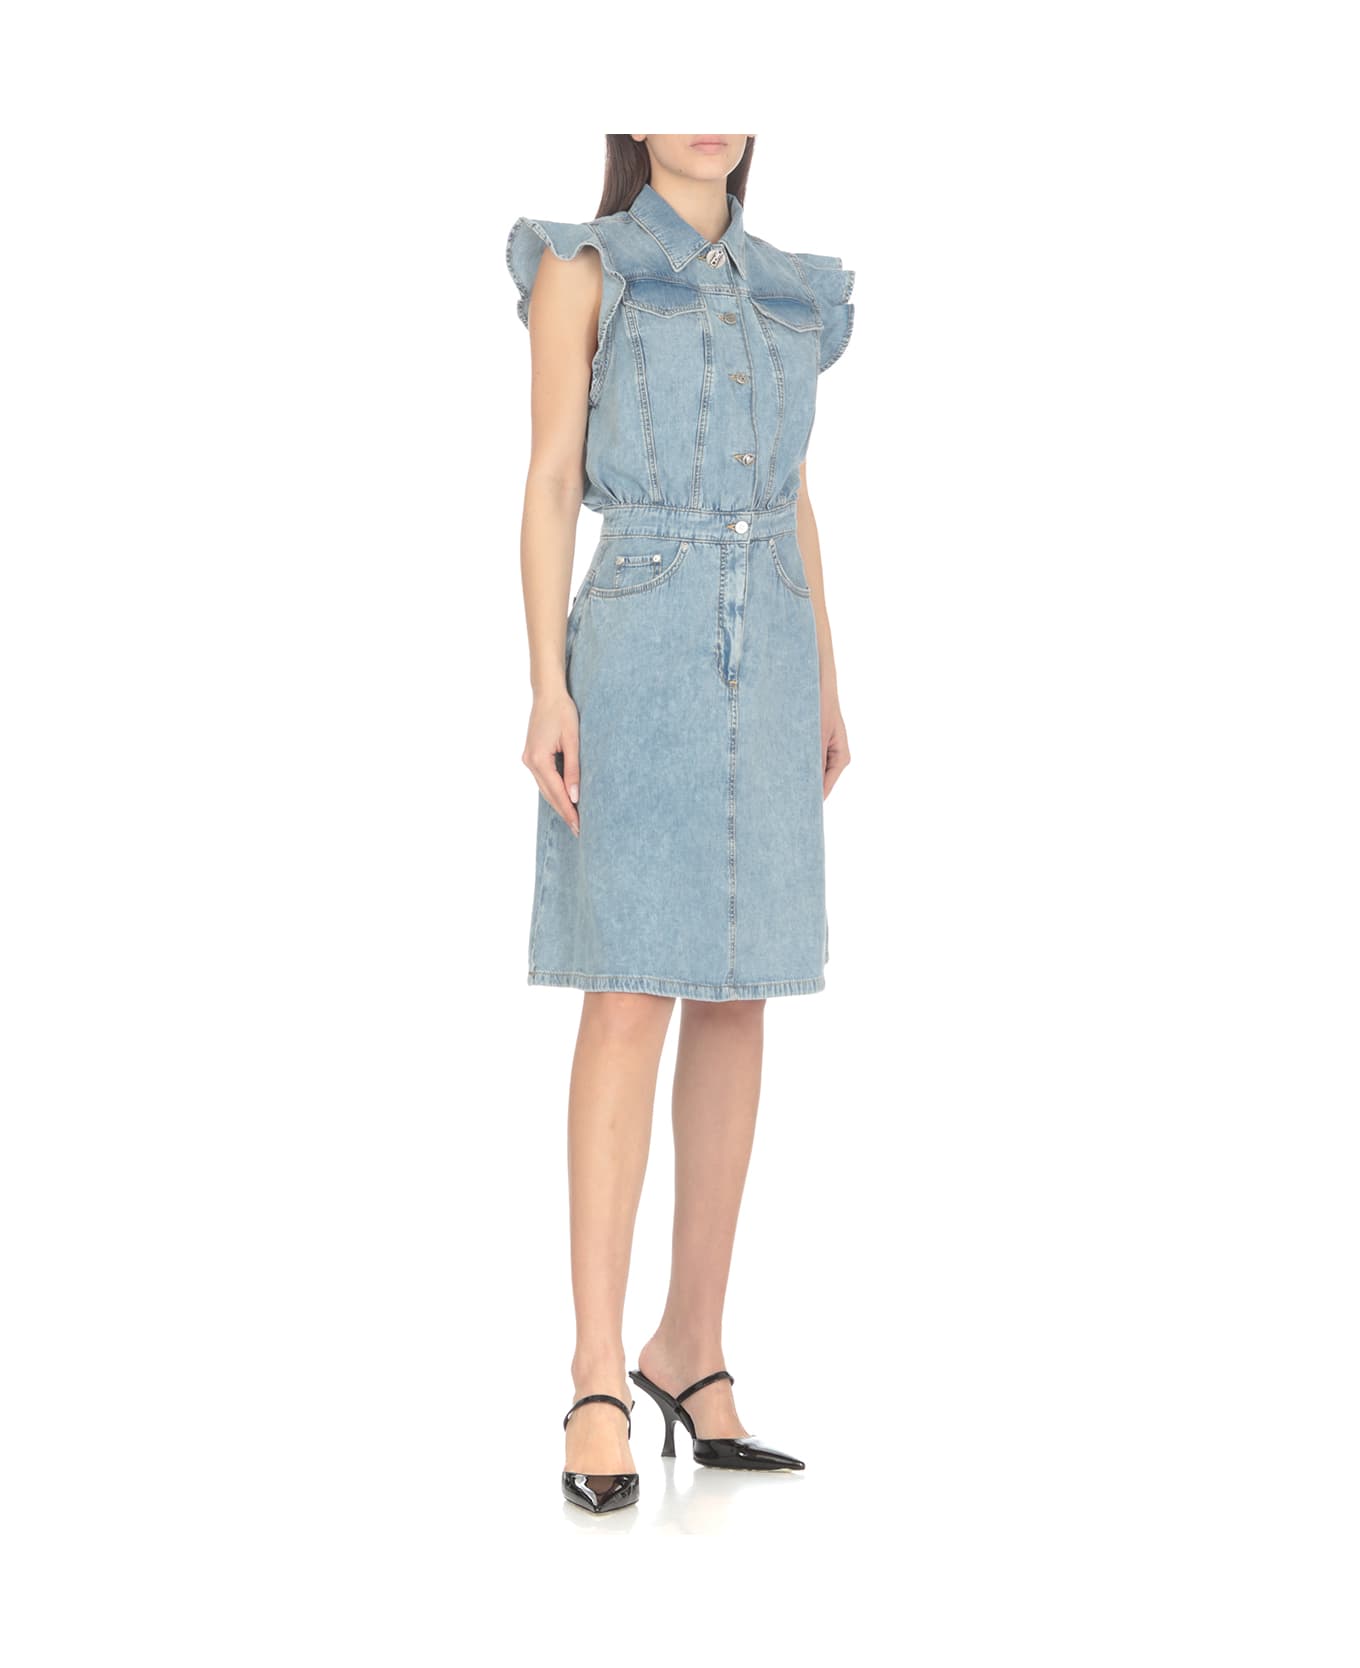 M05CH1N0 Jeans Cotton Dress - Stone Washed ワンピース＆ドレス